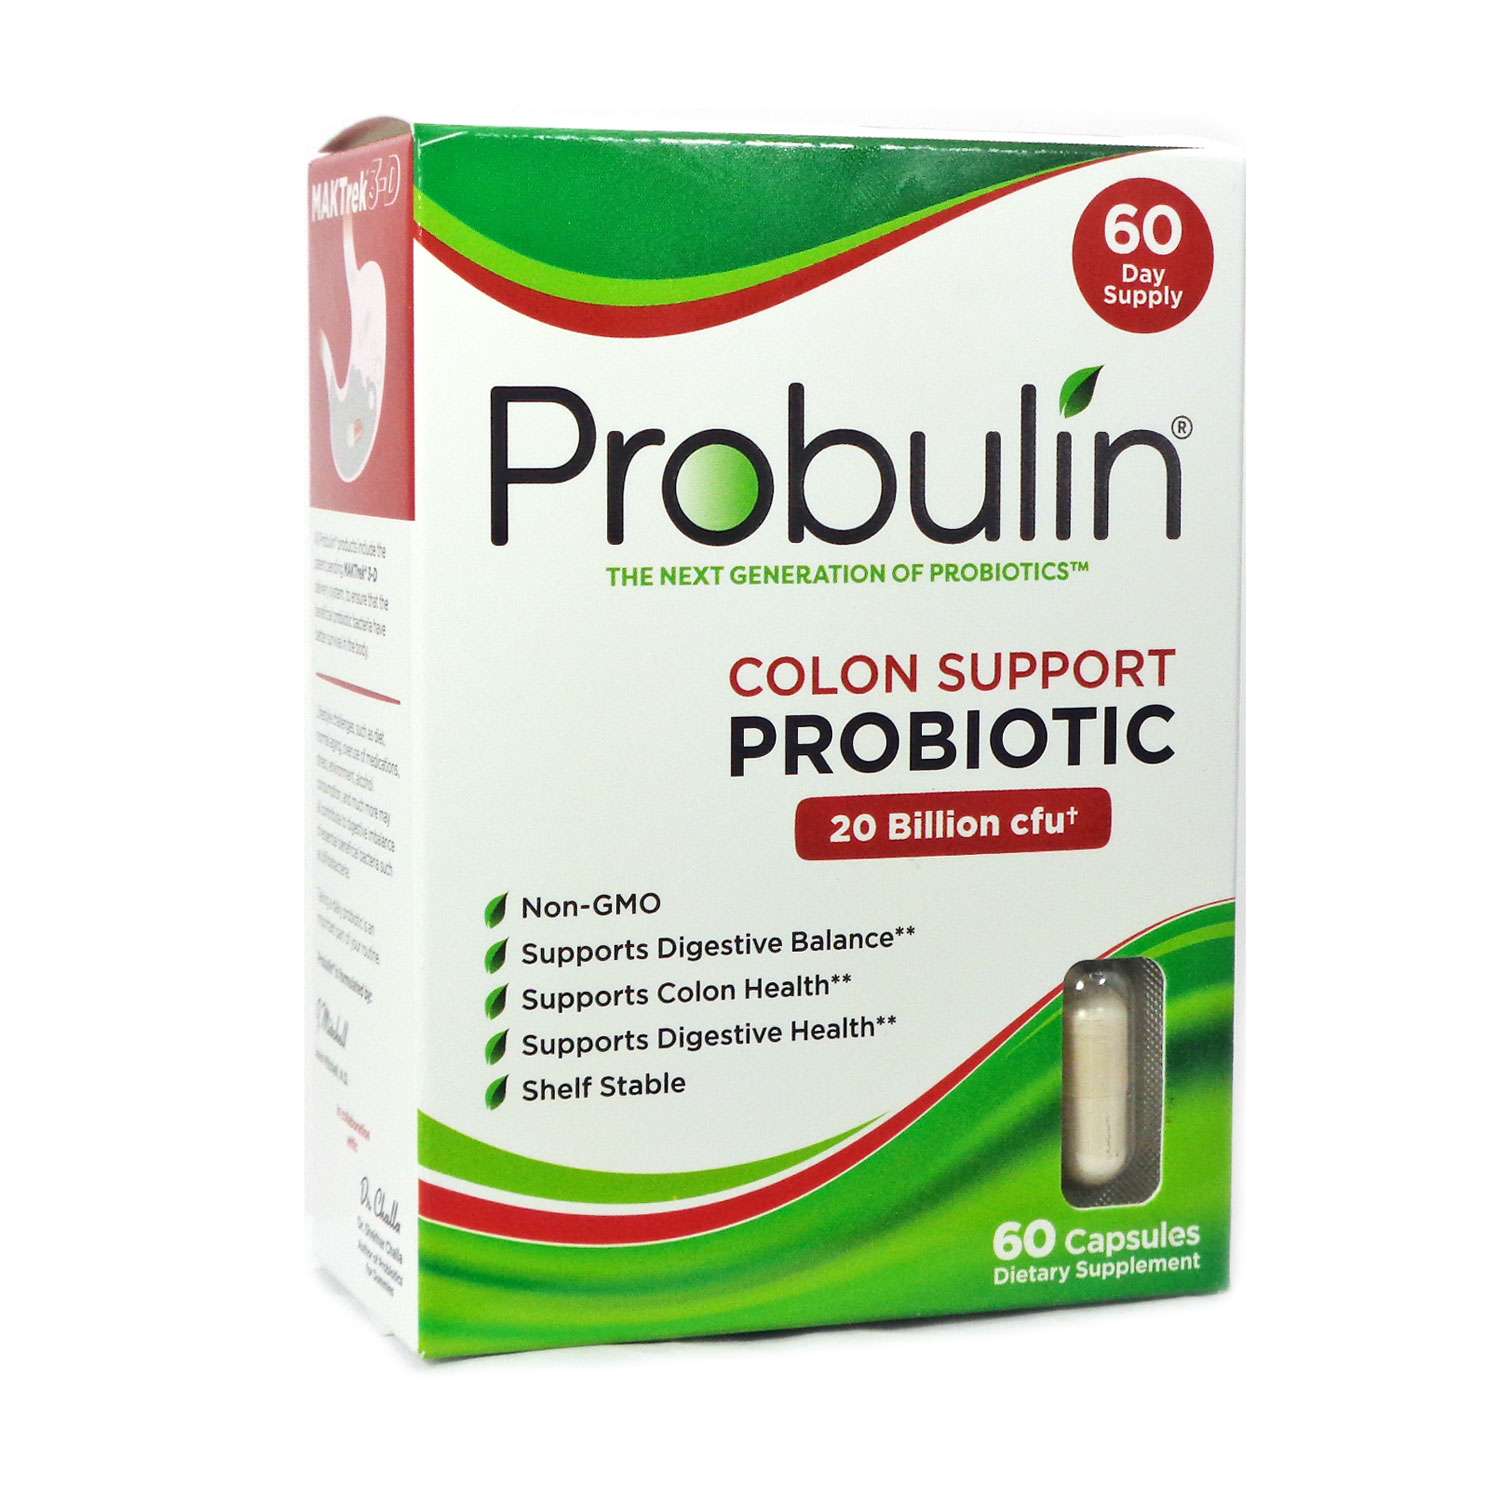 Colon Support Probiotic by Probulin